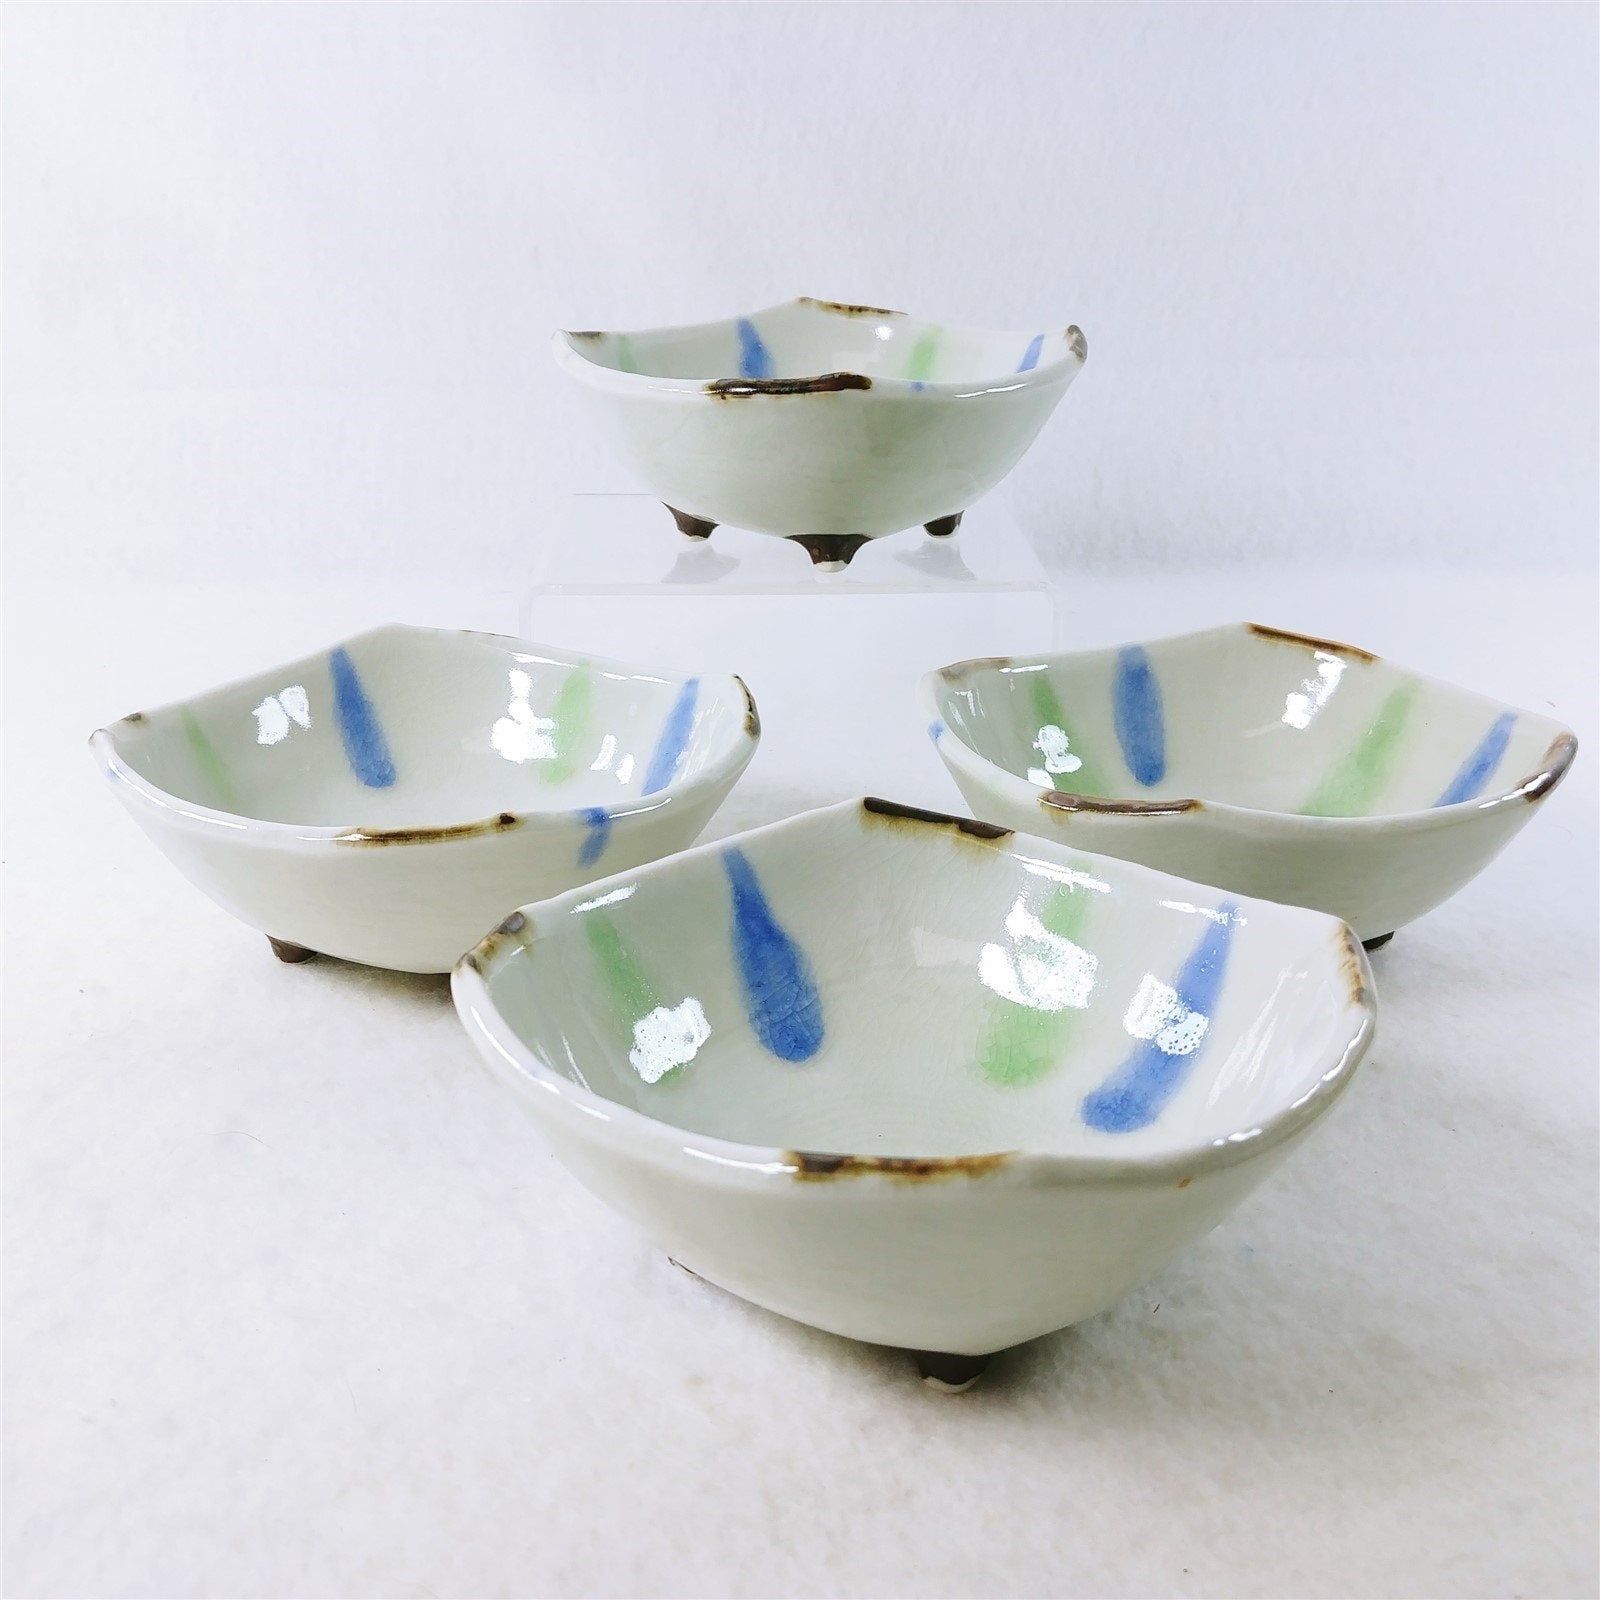 Footed Bowls Gold Corner Accents Ceramic Set of 4